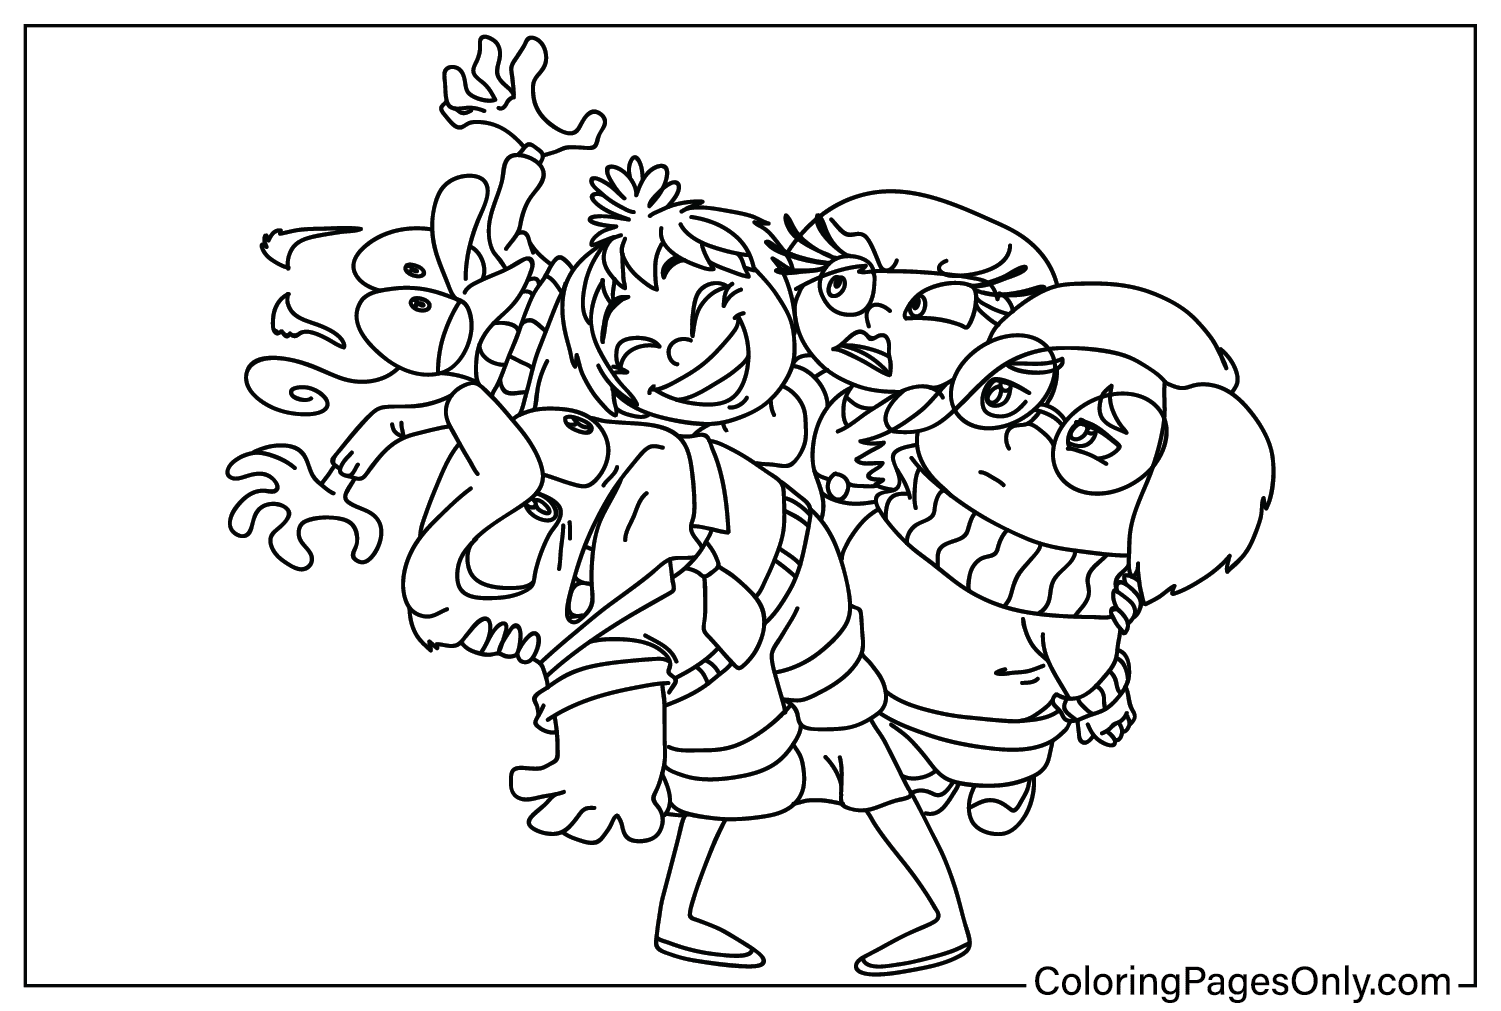 Inside Out 2 Coloring Page for Adults from Inside Out 2